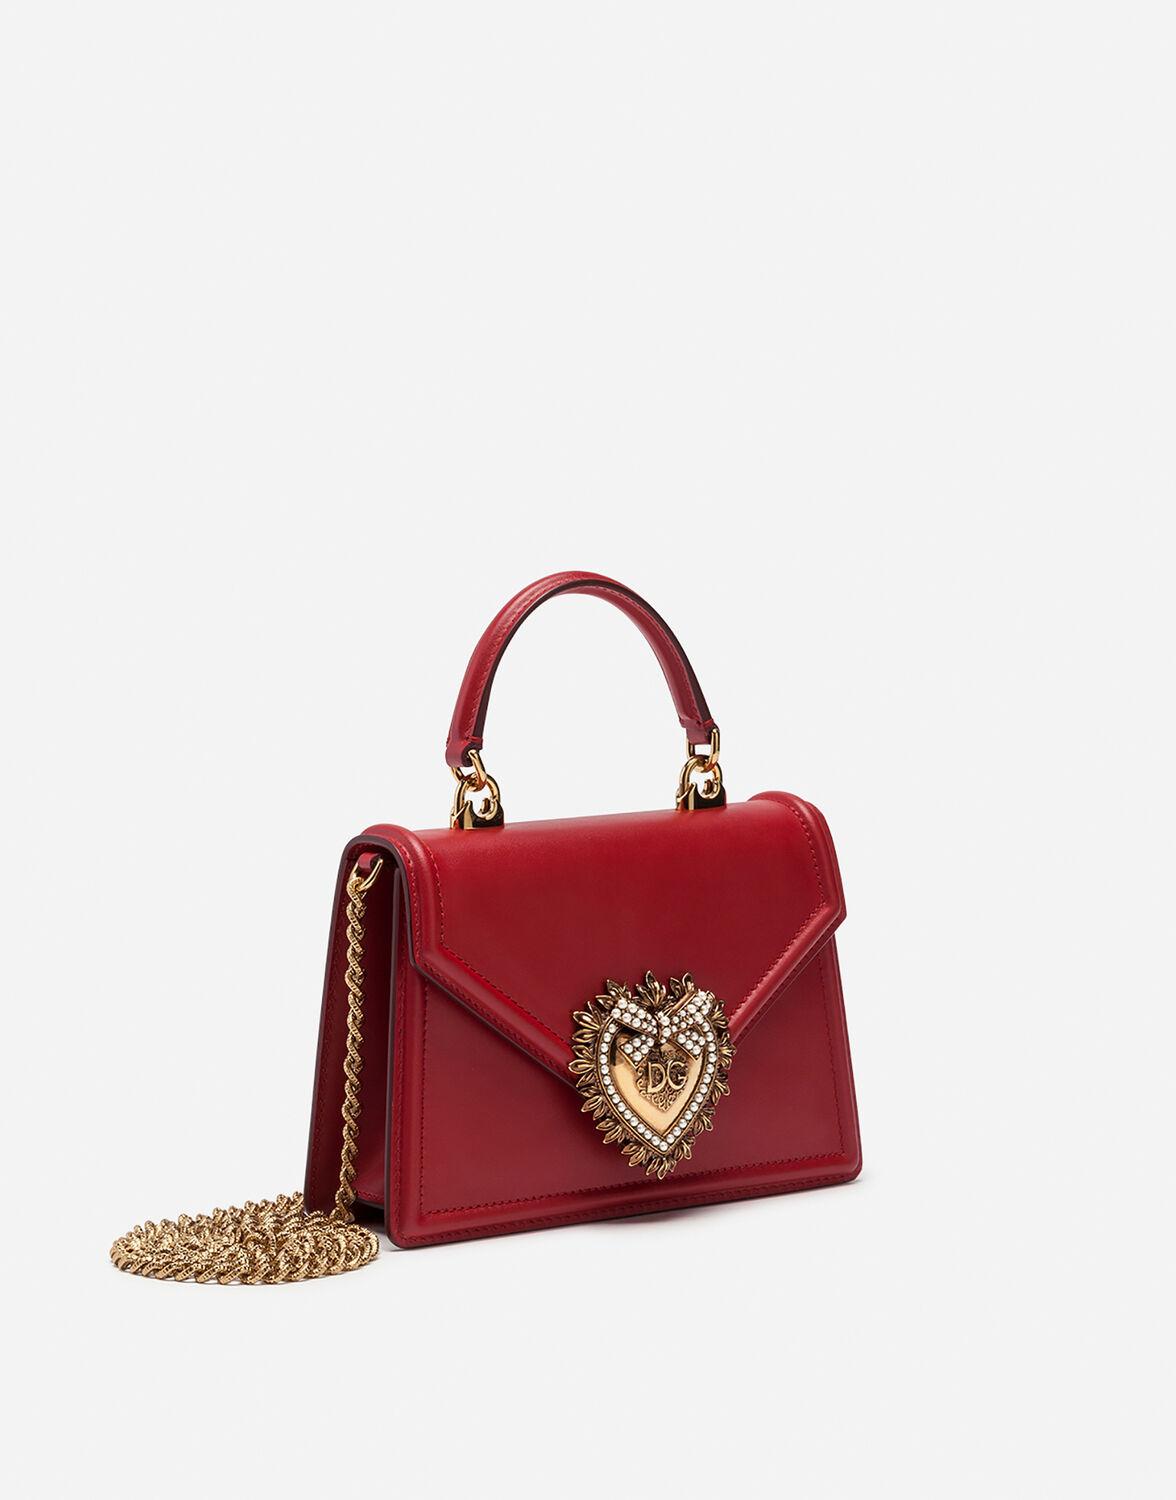 Dolce & Gabbana Leather Medium Devotion Bag in Red - Save 21% - Lyst